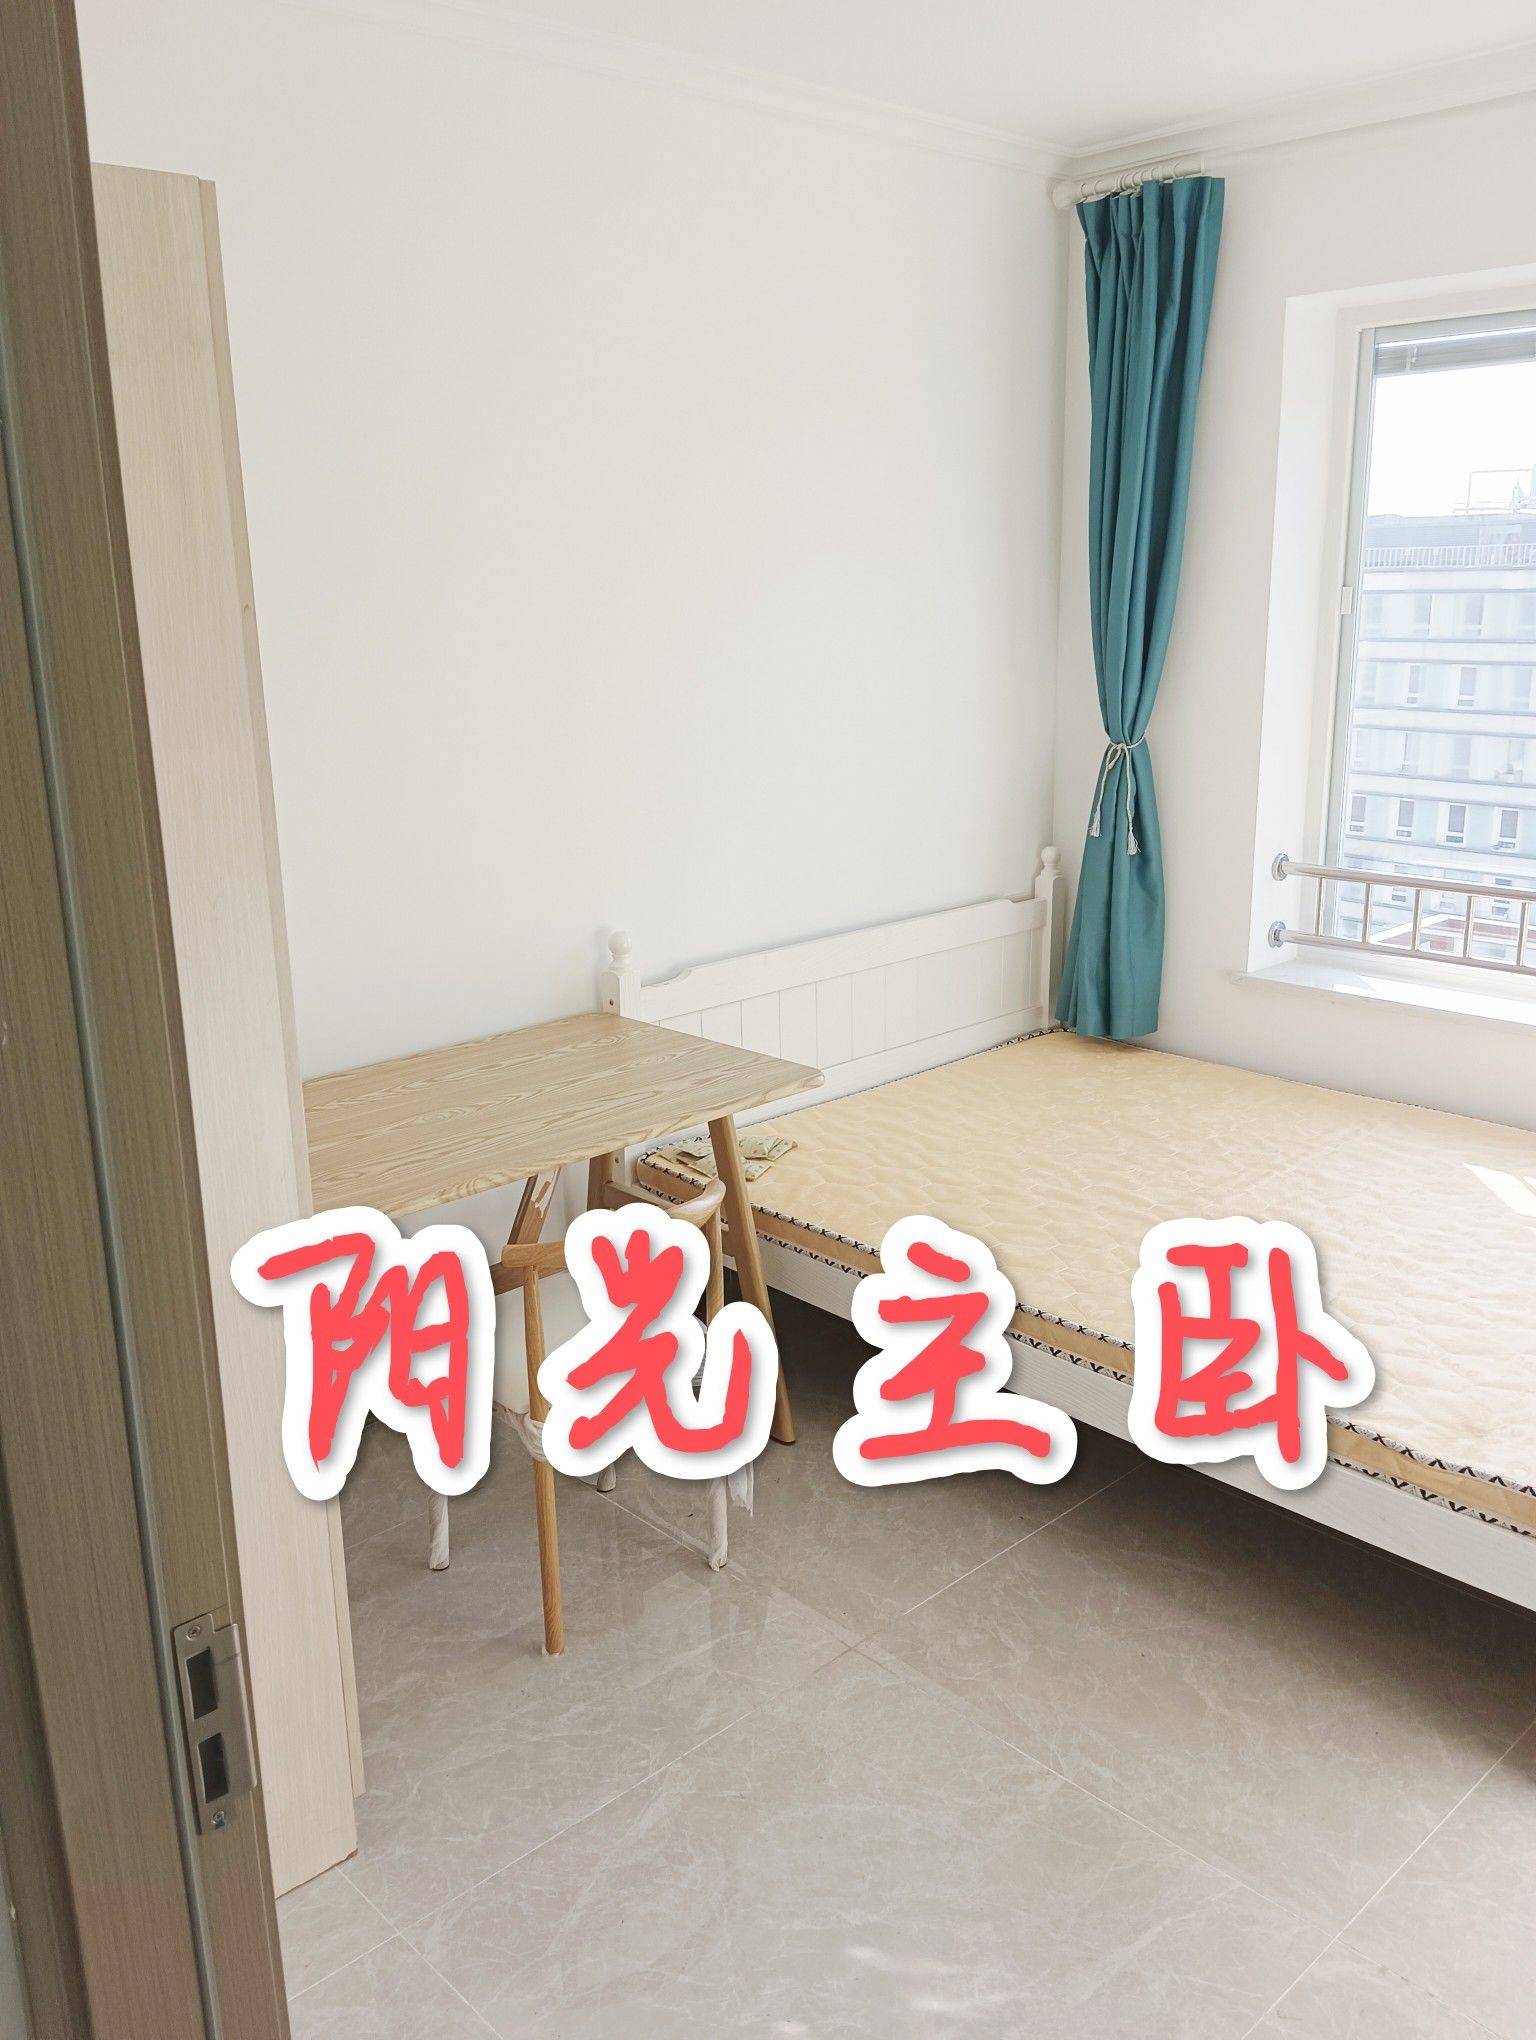 Beijing-Haidian-Cozy Home,Clean&Comfy,Hustle & Bustle,Chilled